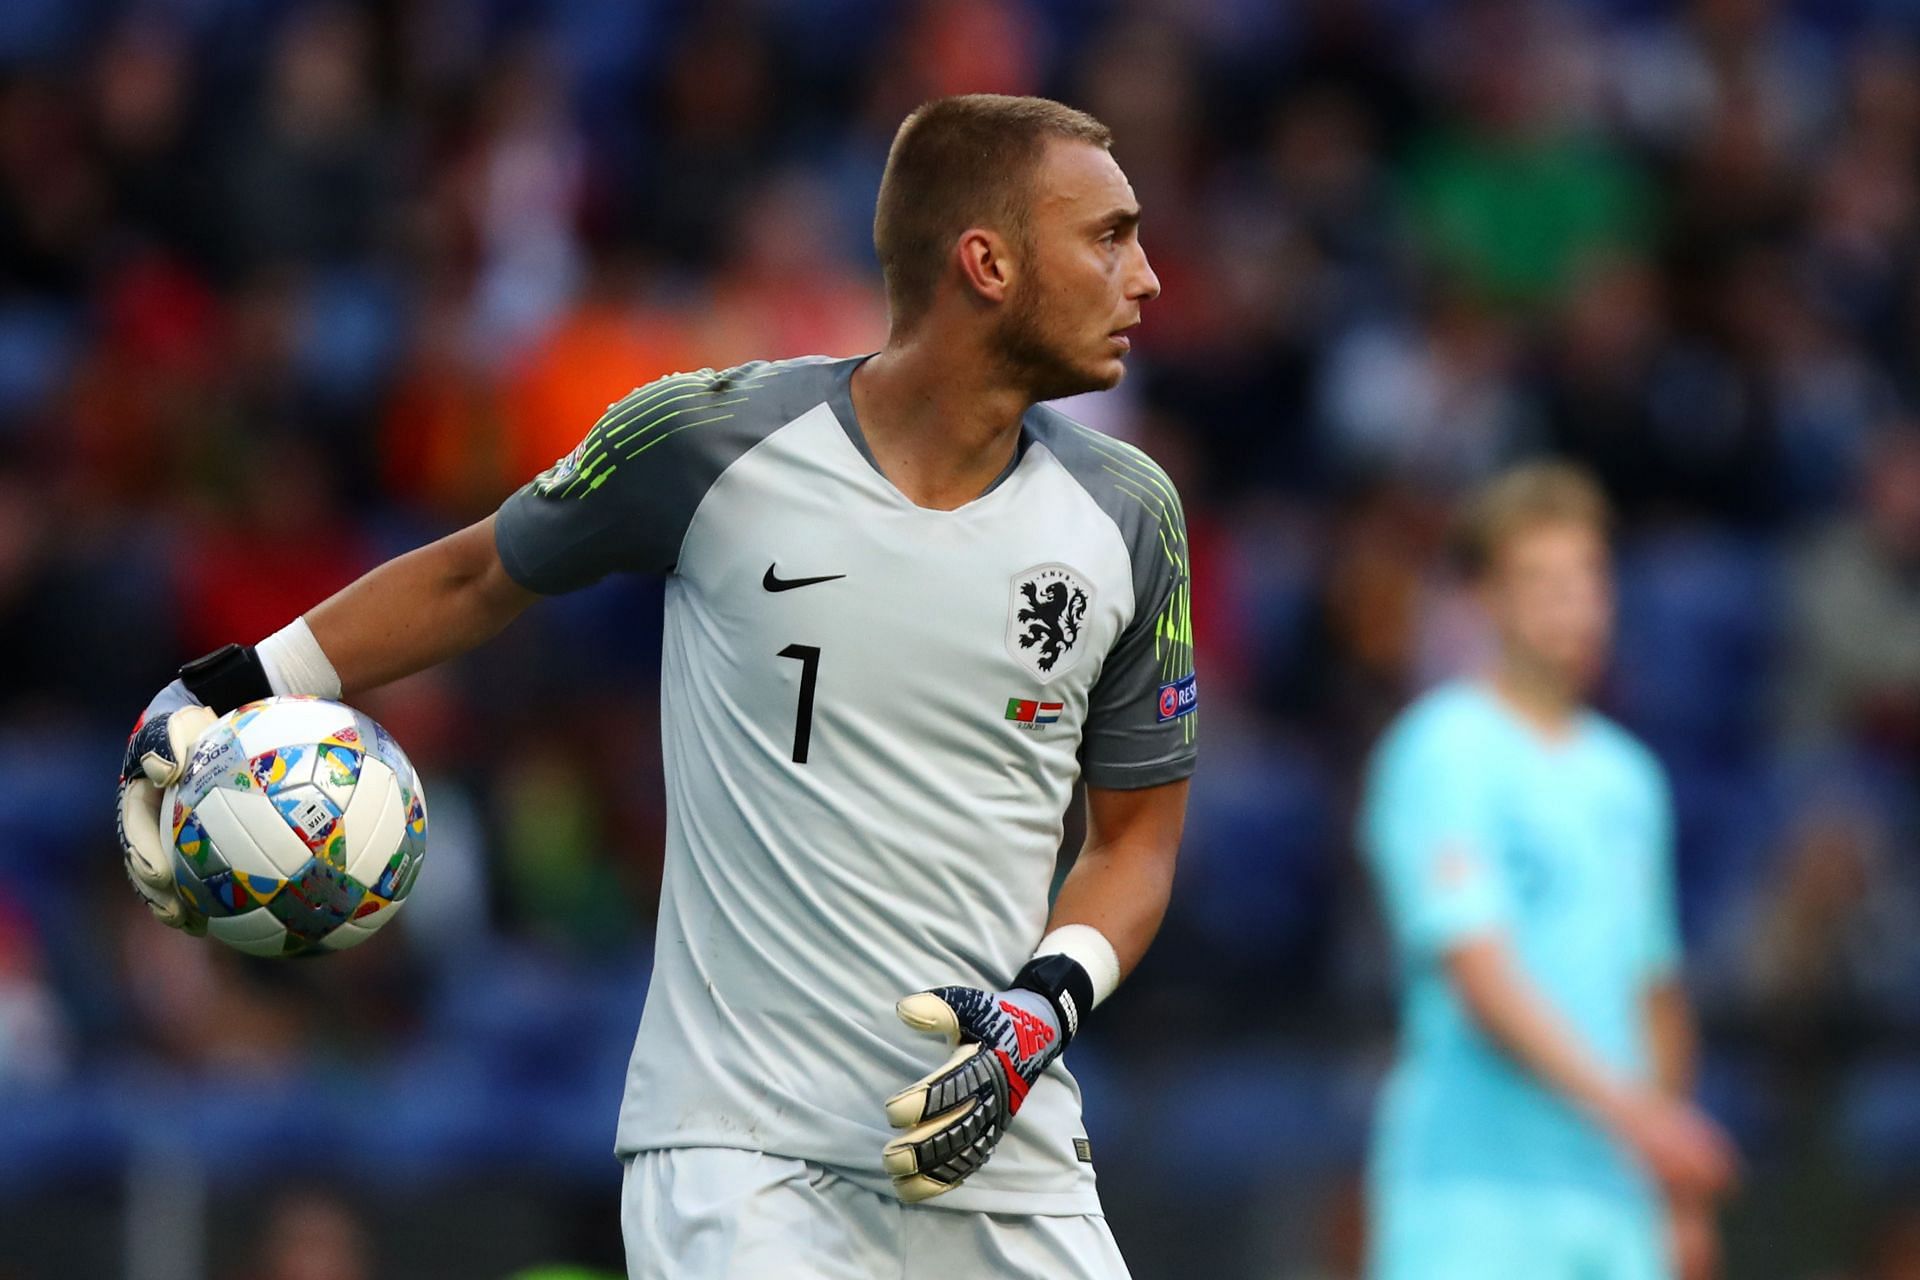 Jasper Cillessen in action for Netherlands during a UEFA Nations League encounter against Portugal